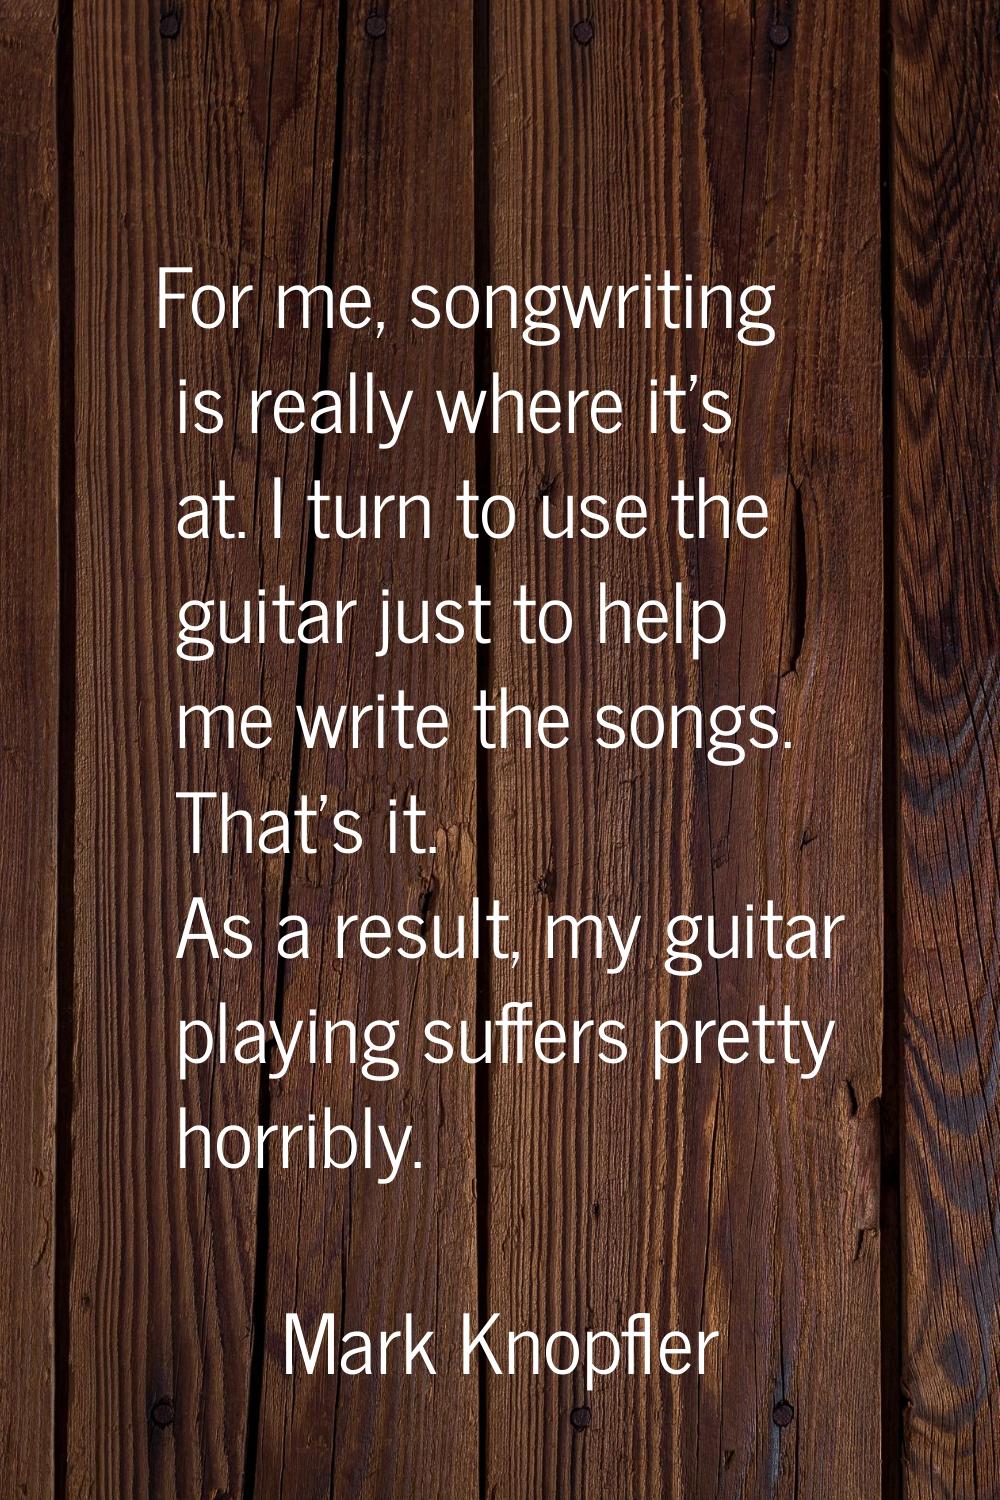 For me, songwriting is really where it's at. I turn to use the guitar just to help me write the son